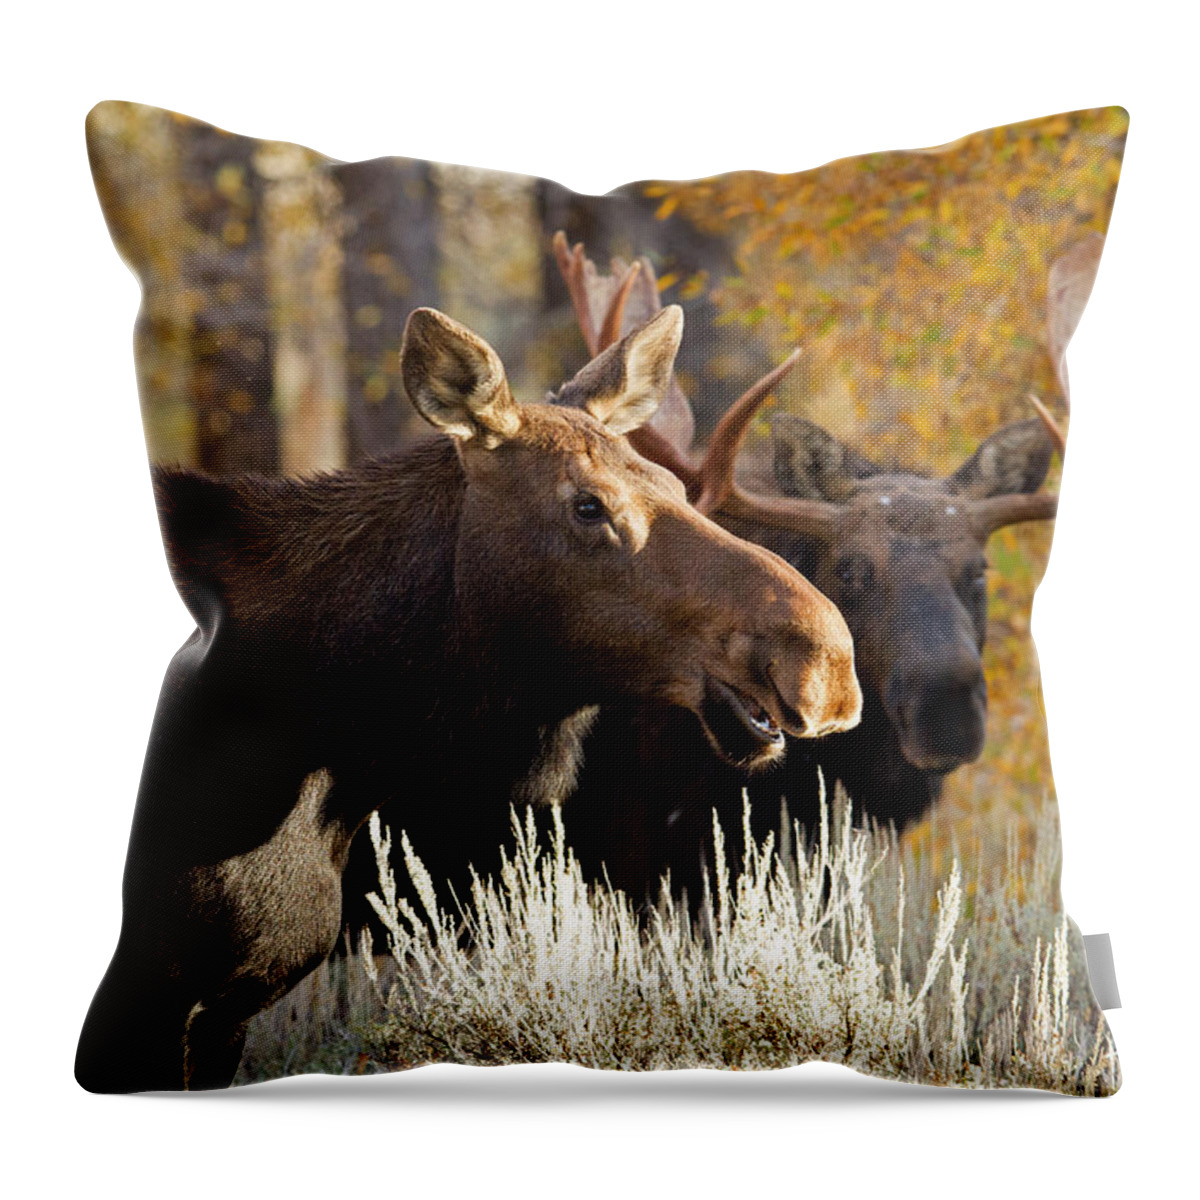 Moose Throw Pillow featuring the photograph Here Comes Casanova by Shari Sommerfeld